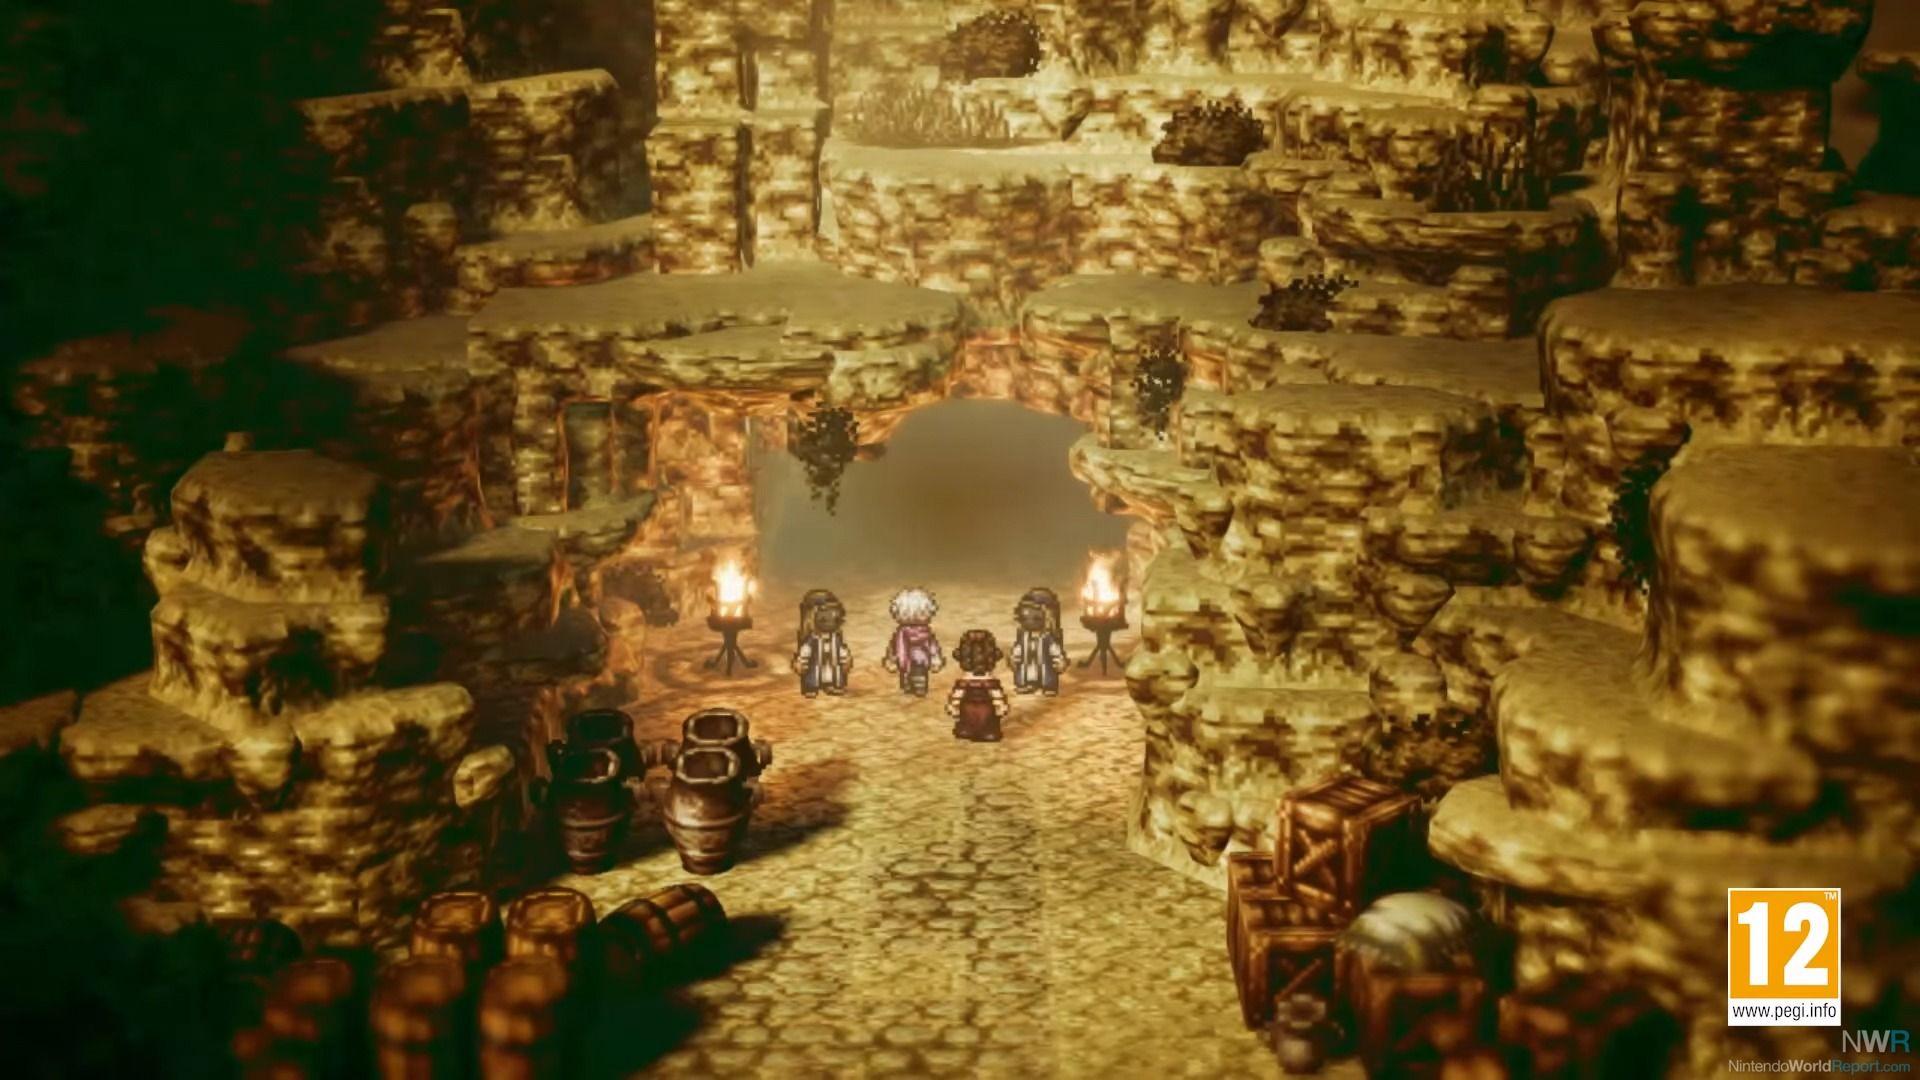 octopath traveler switch download free